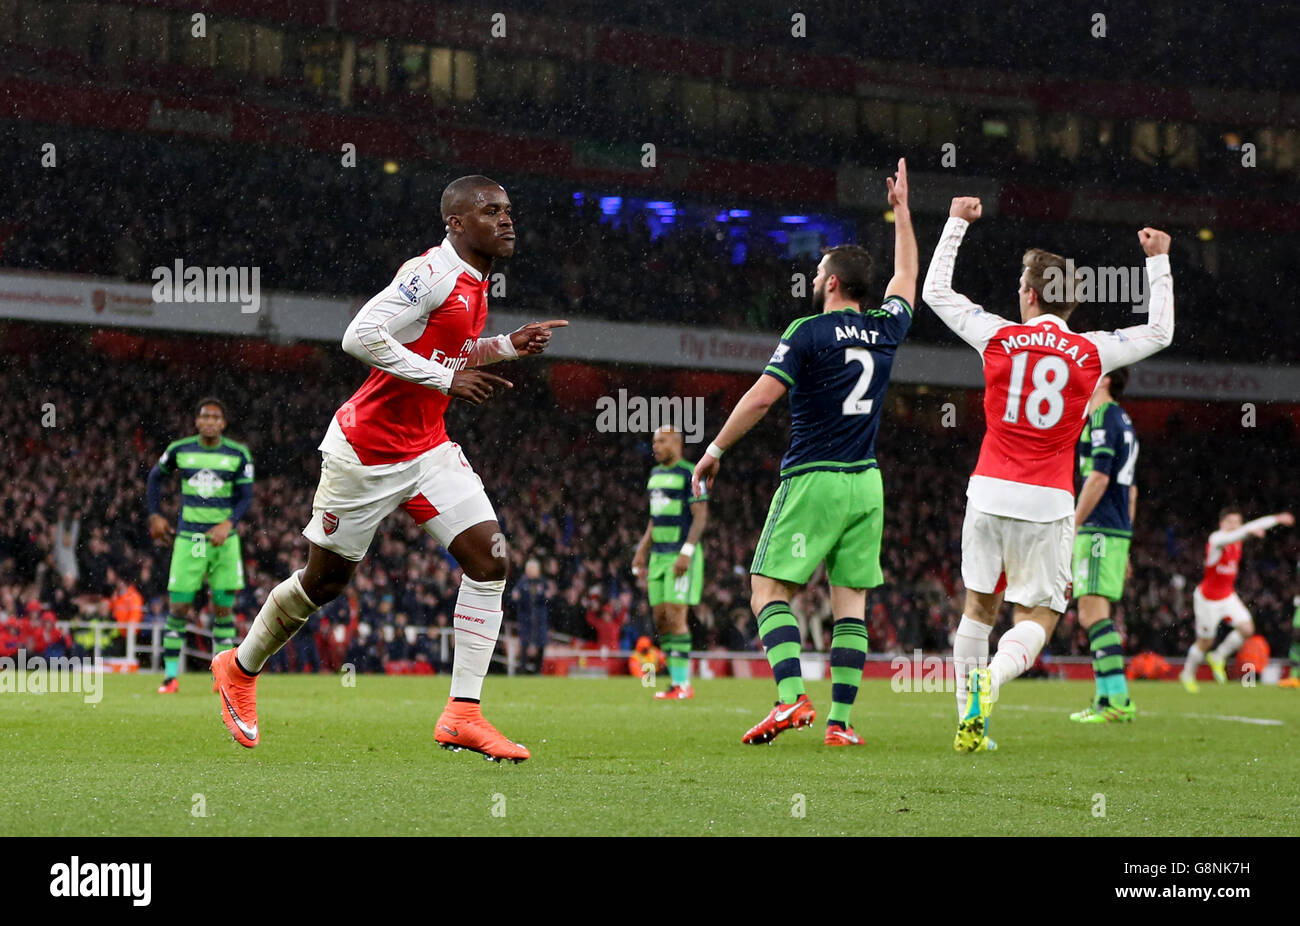 Arsenal v Swansea City - Barclays Premier League - Emirates Stadium. Arsenal's Joel Campbell (left) celebrates scoring his side's first goal of the game Stock Photo